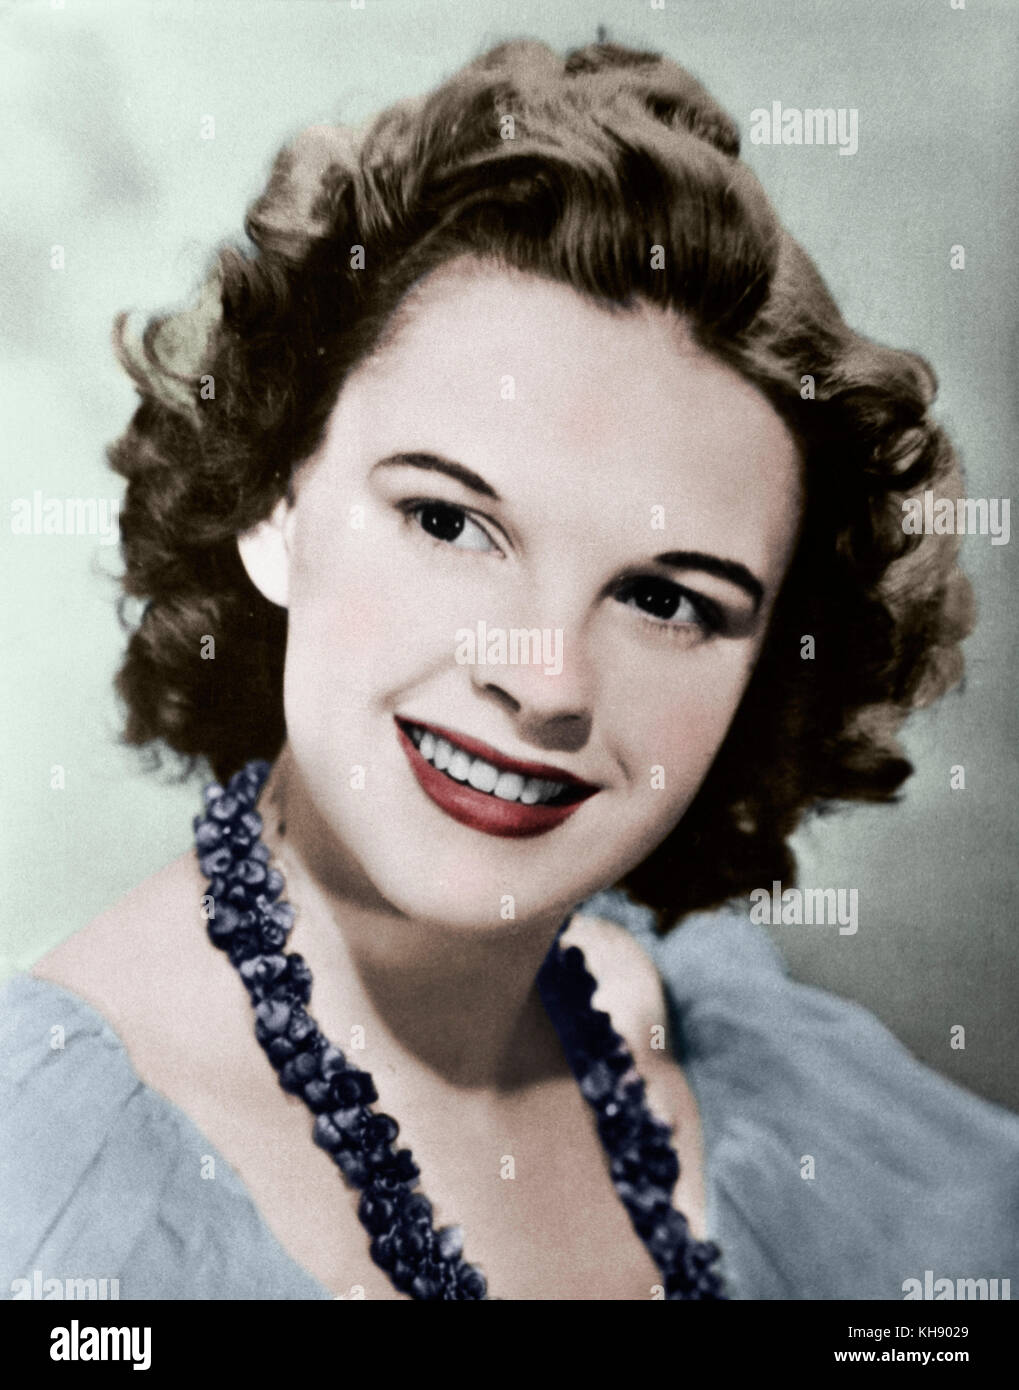 Judy Garland - portrait - American singer and actress - 10 June 1922 - 22 June 1969 - photo: unknown Stock Photo